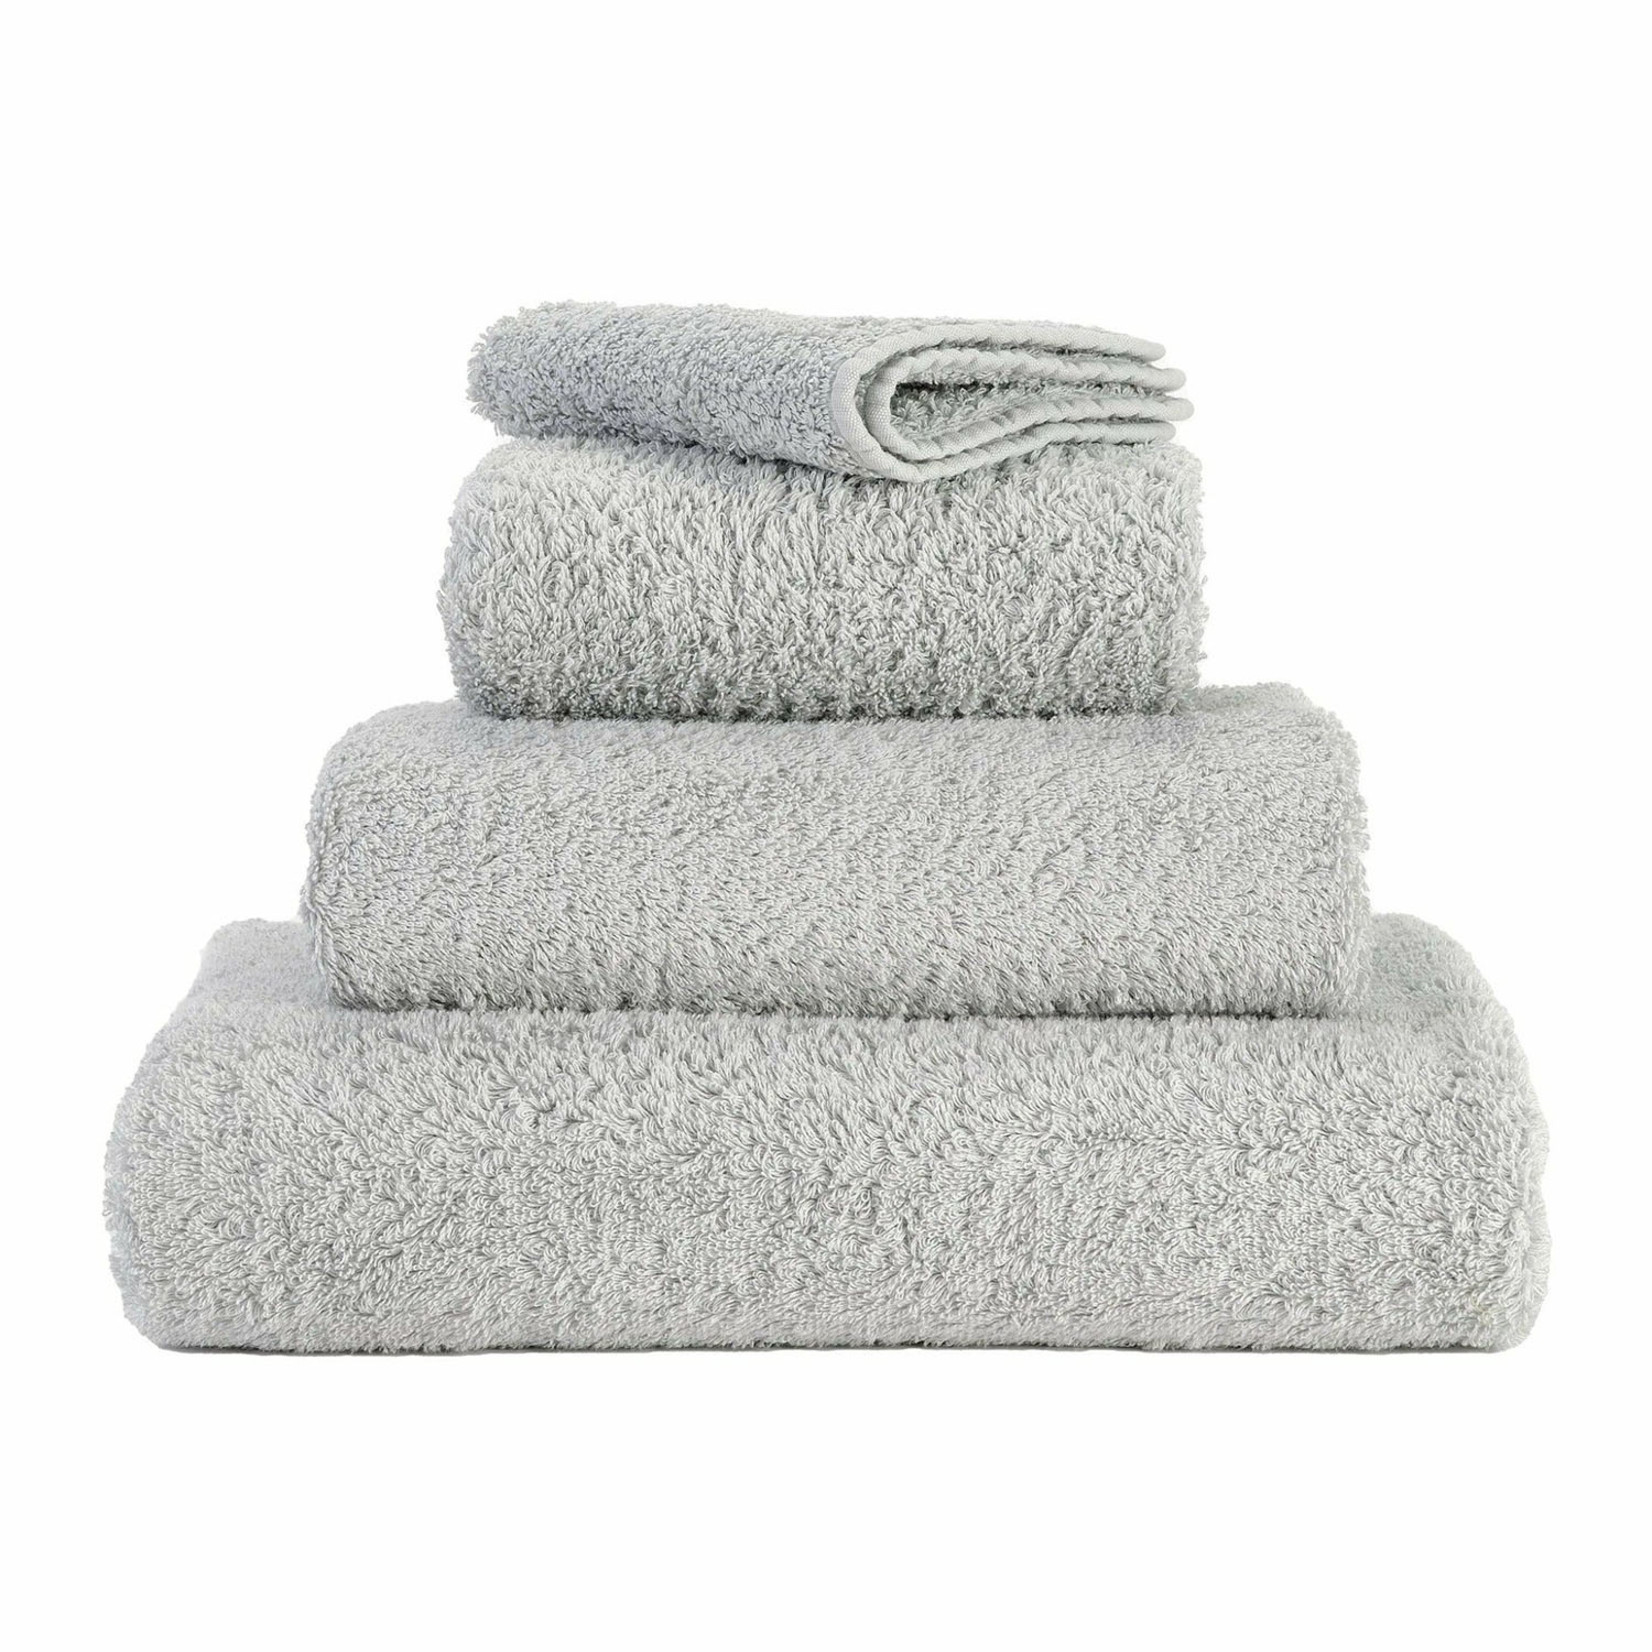 Abyss Abyss Super Pile Towels 992 Platinum